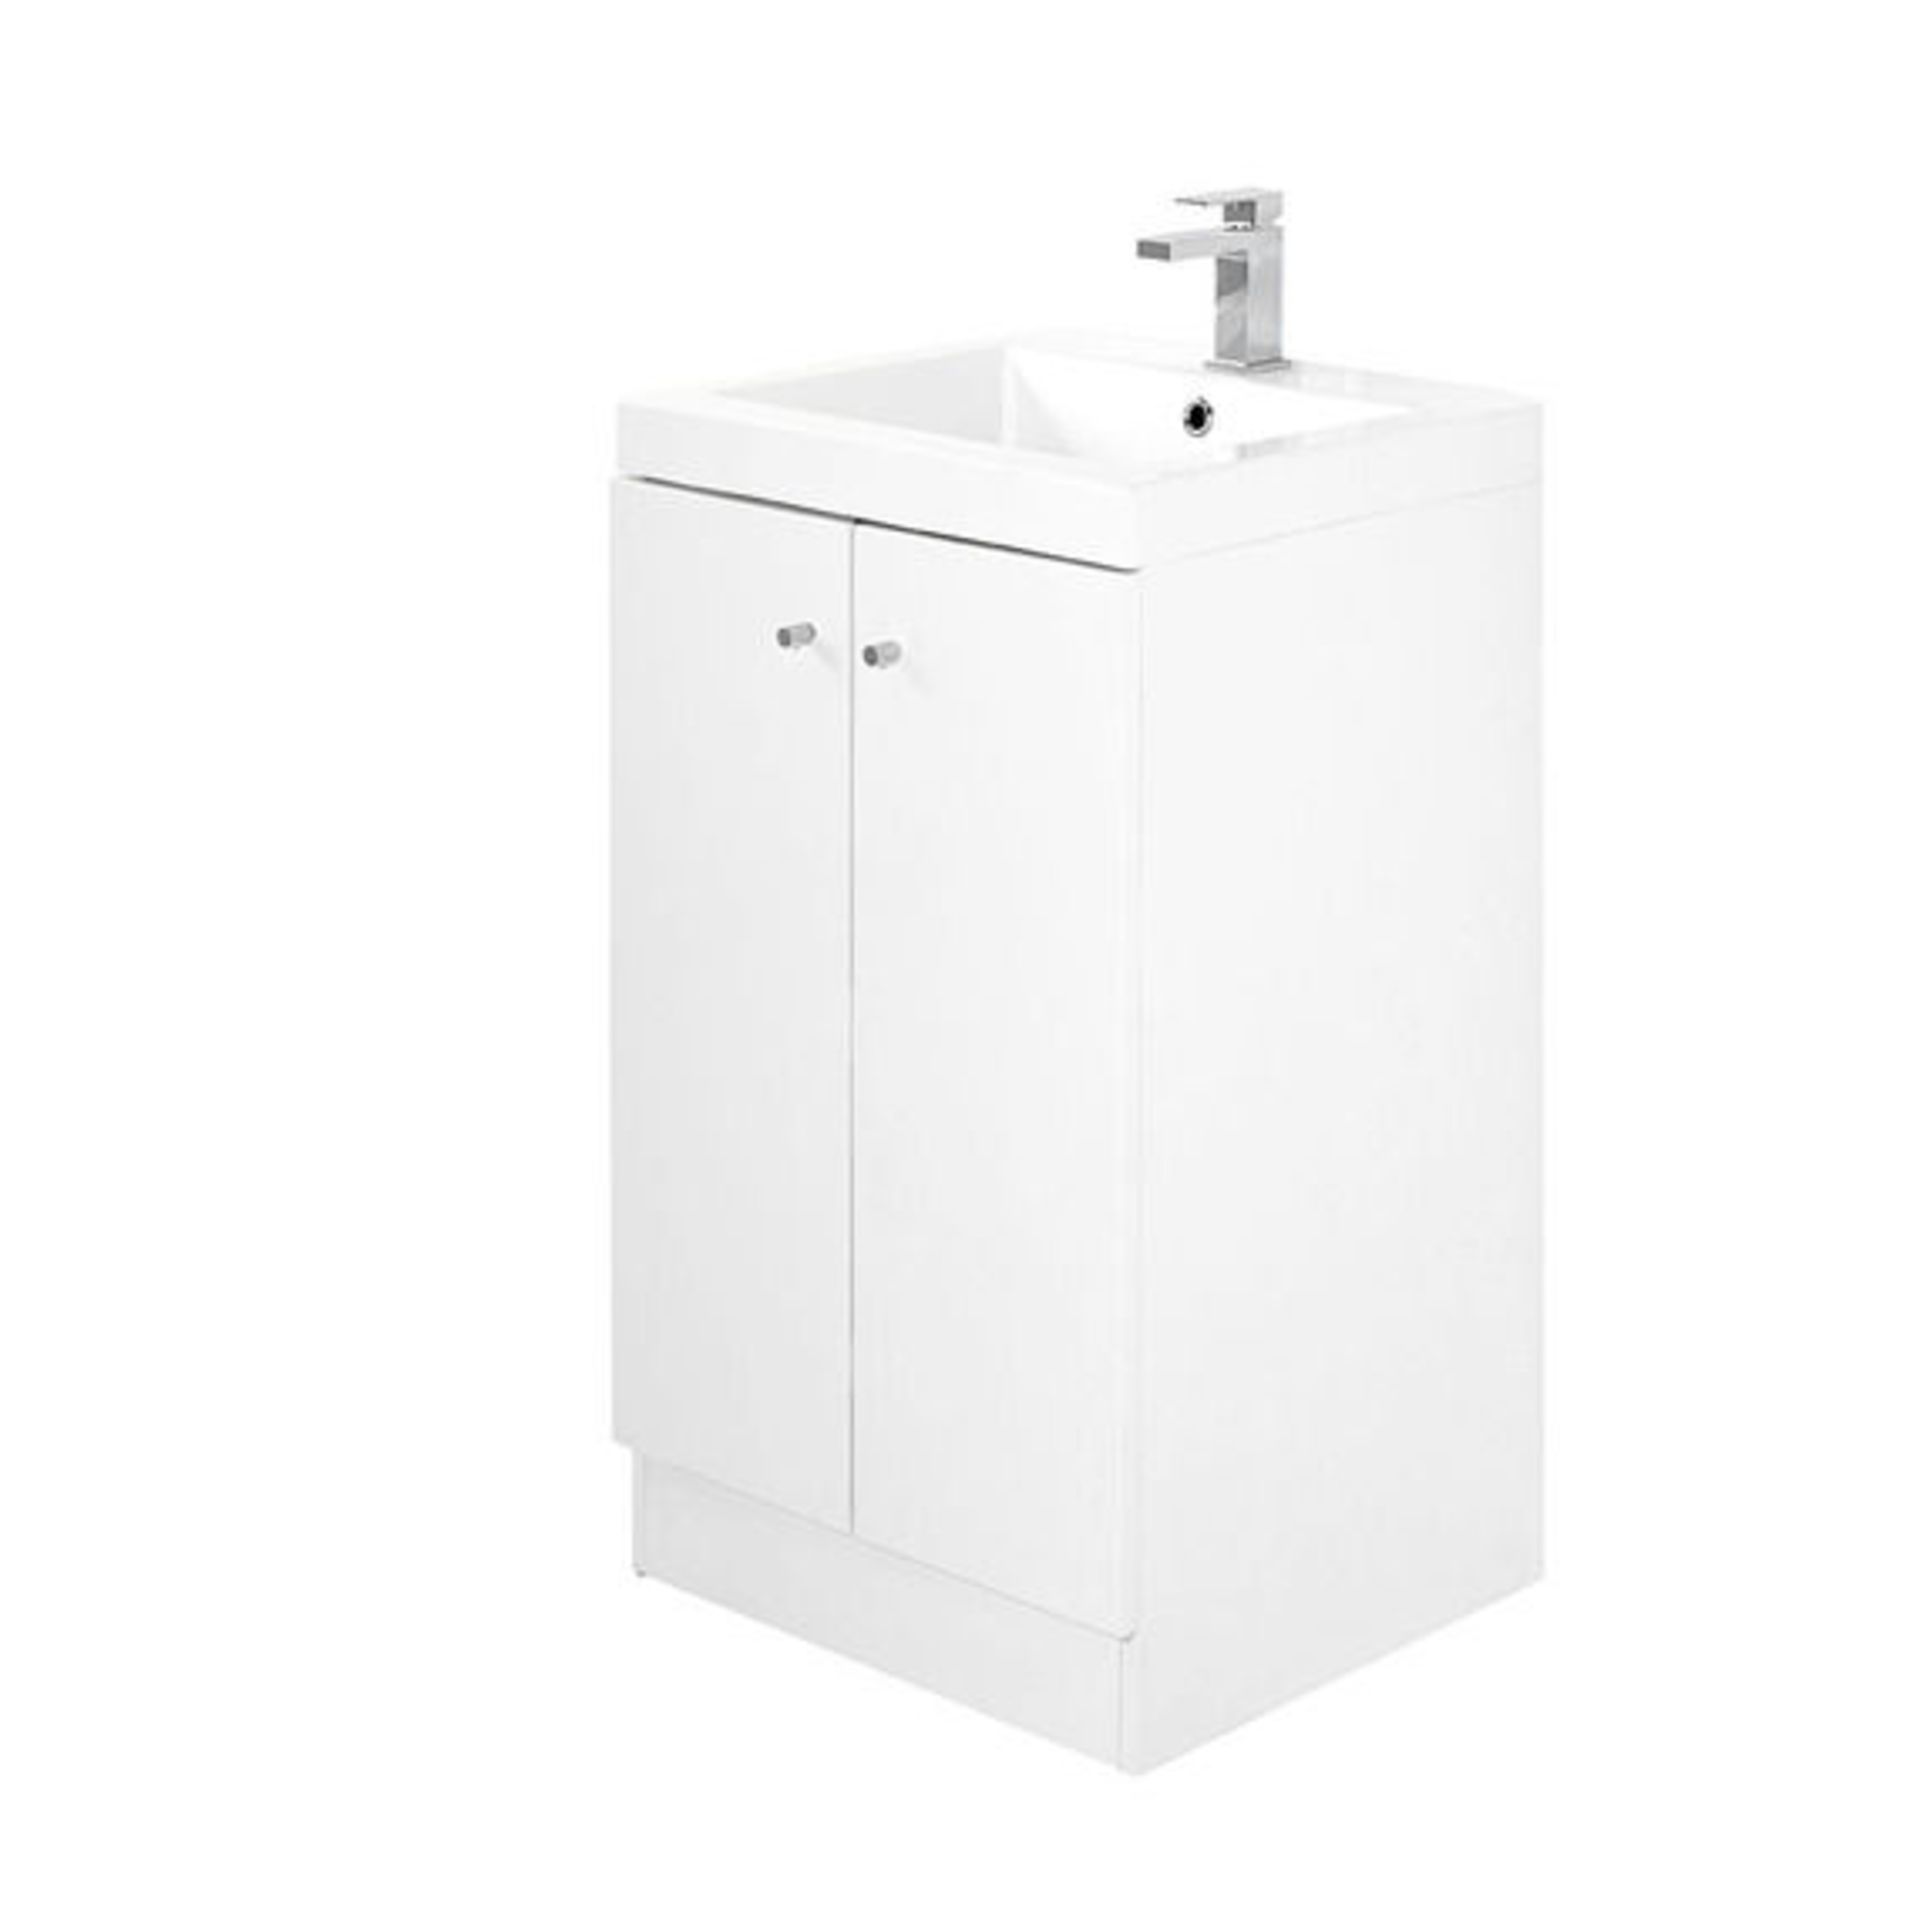 10 x Alpine Duo 500 Floor Standing Vanity Unit - Gloss White - Brand New Boxed Stock - Dimensions: - Image 3 of 4